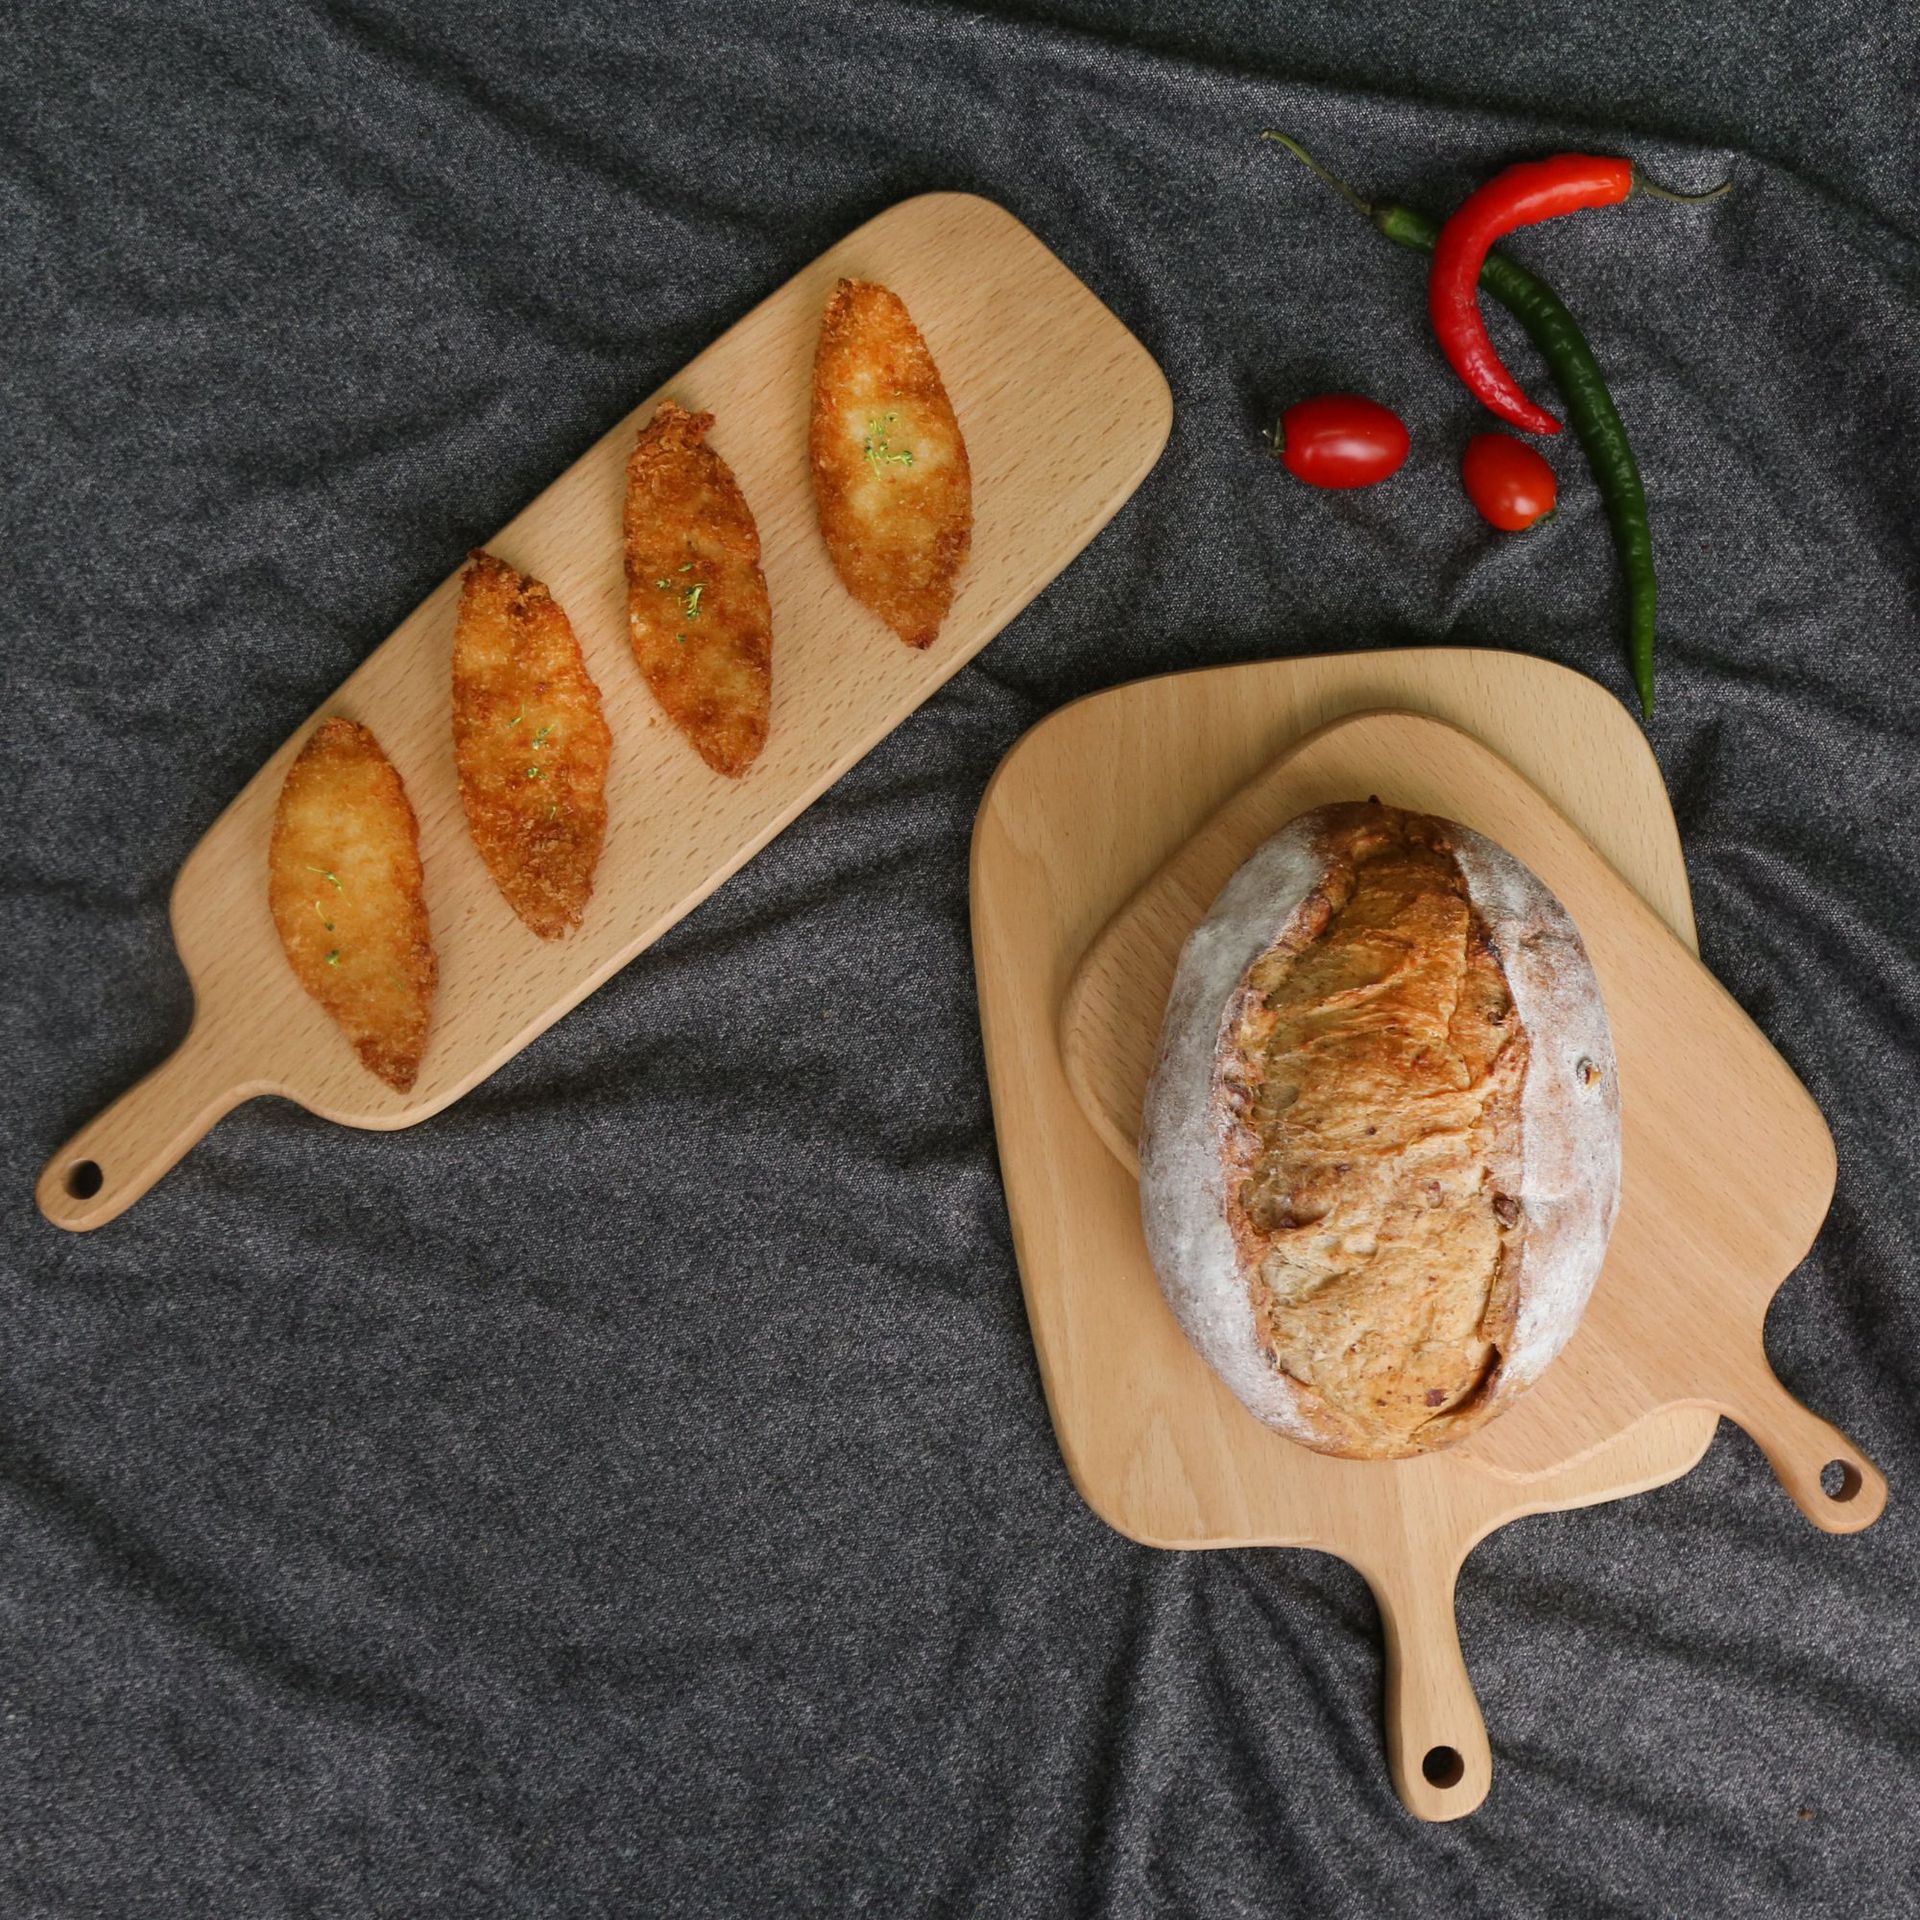 

Wooden Cutting Boards Fashion Fruit Plate Whole Wood Chopping Blocks Beech Baking Bread Board Tool No Cracking Deformation